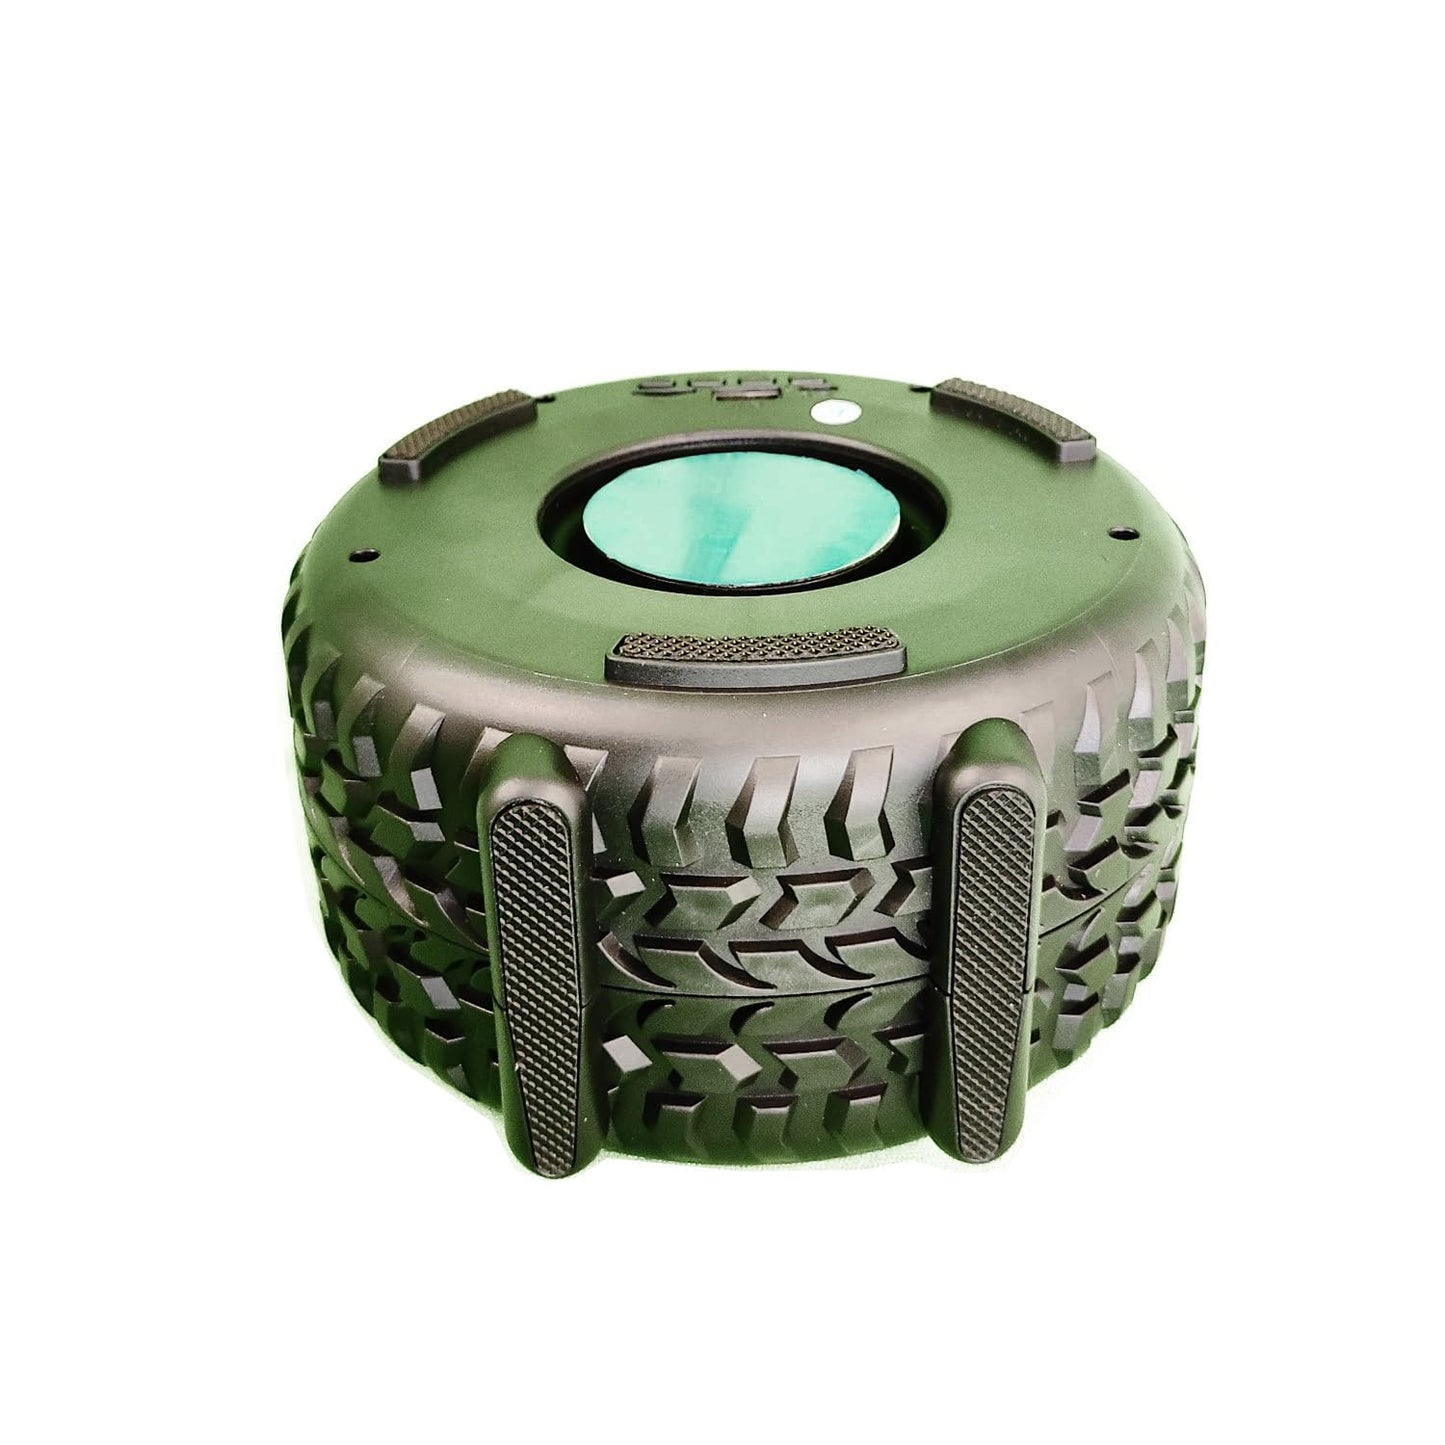 WOOS Portable Tire Shape Bluetooth Speaker, Powerful Sound and Deep Bass, Indoor & Outdoor Use